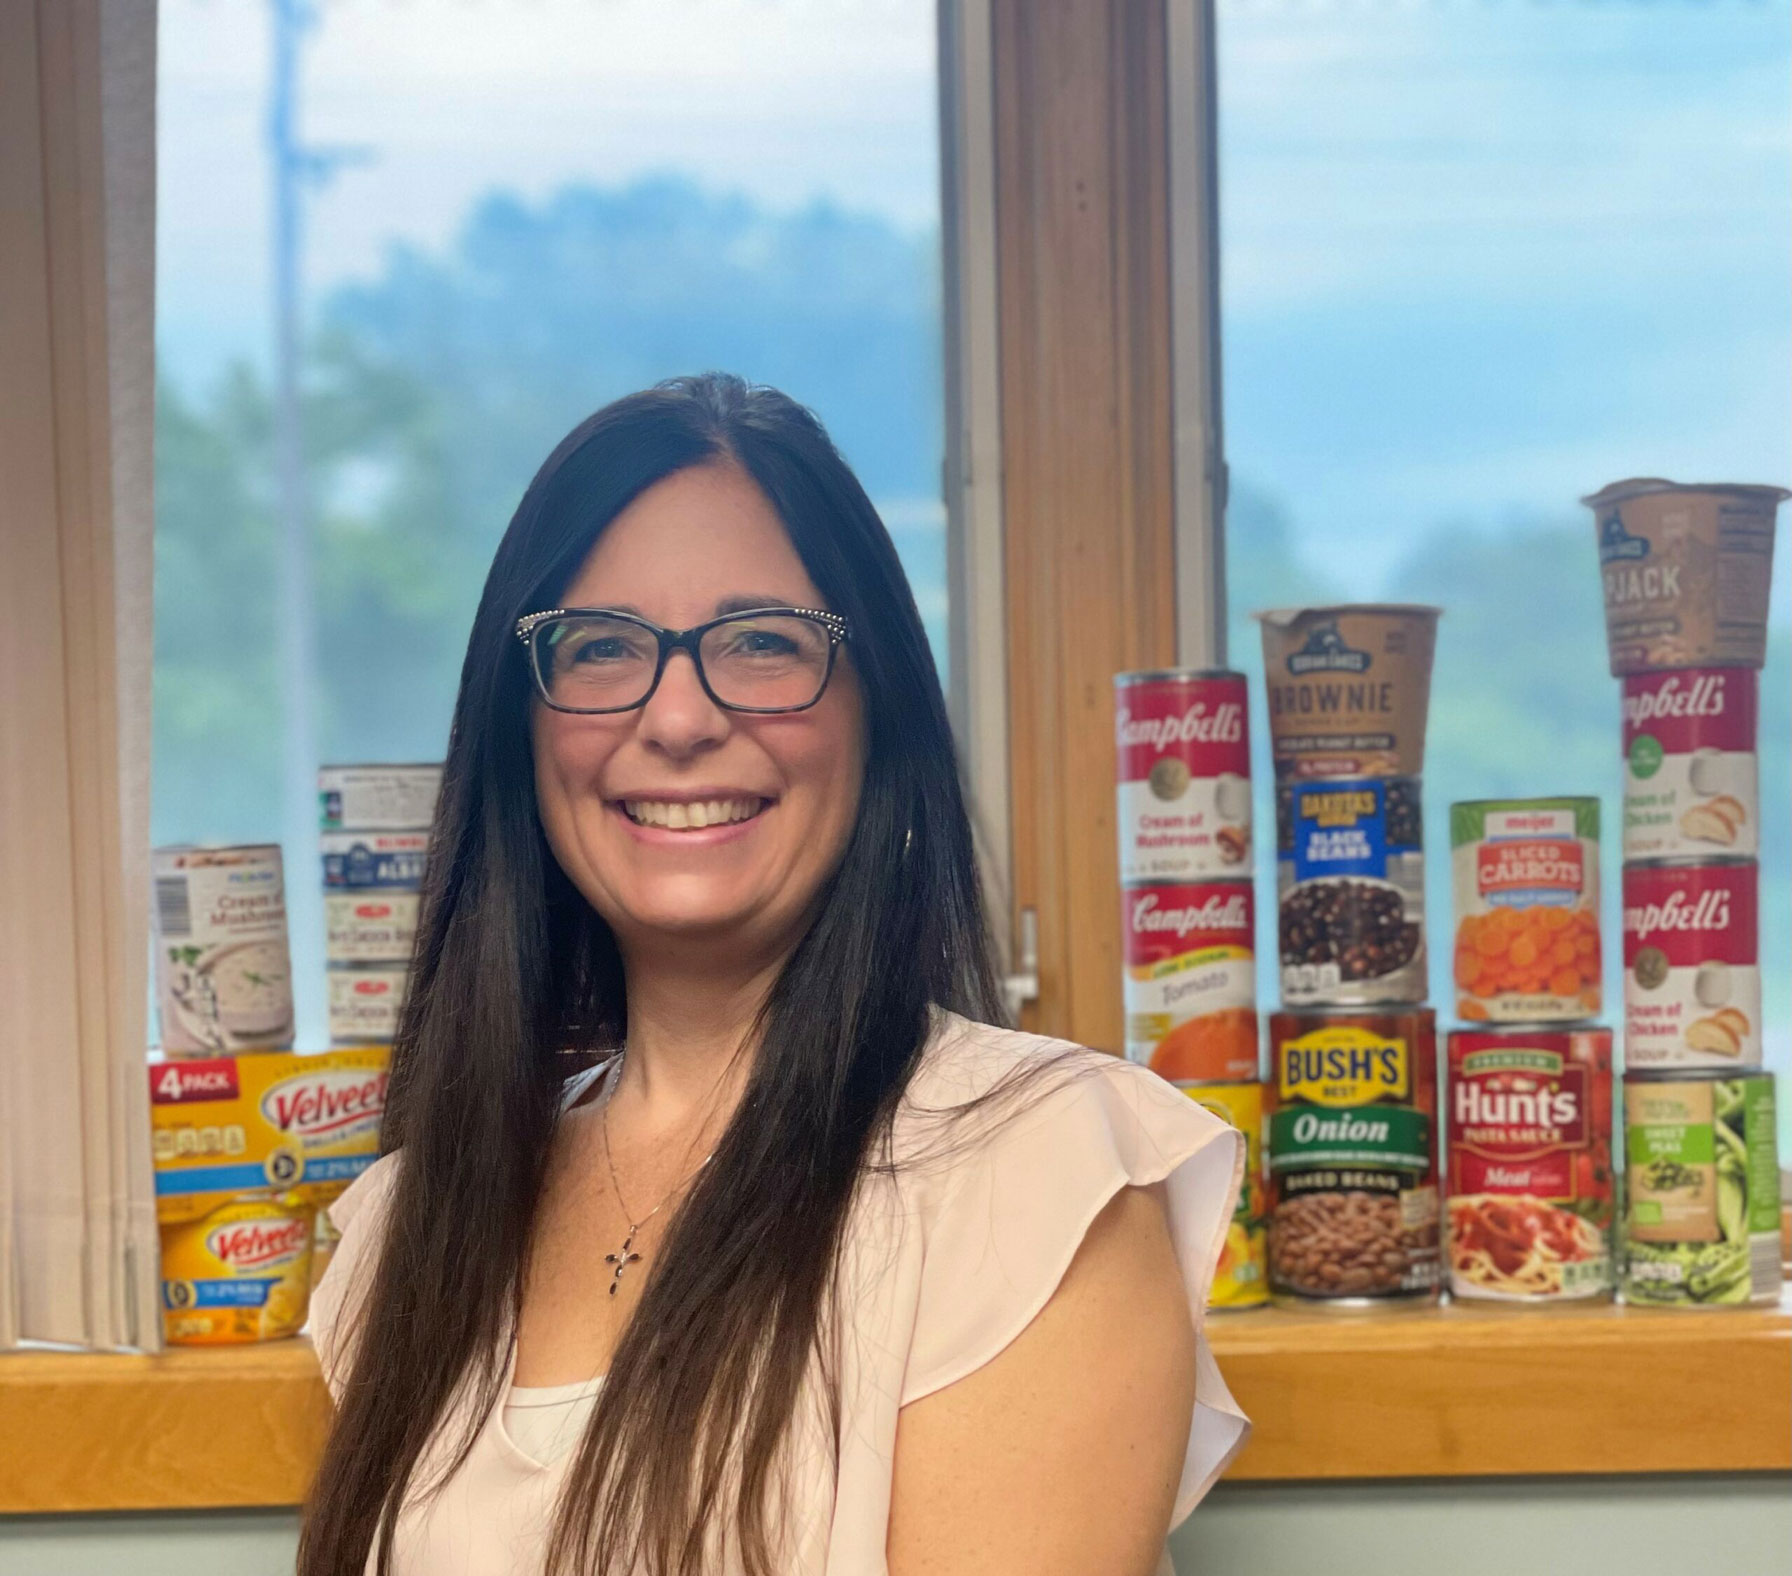 We're canning Luann! Help us fill Luann's office with so many cans of food she won't be able to get in! Donations will help those in need.